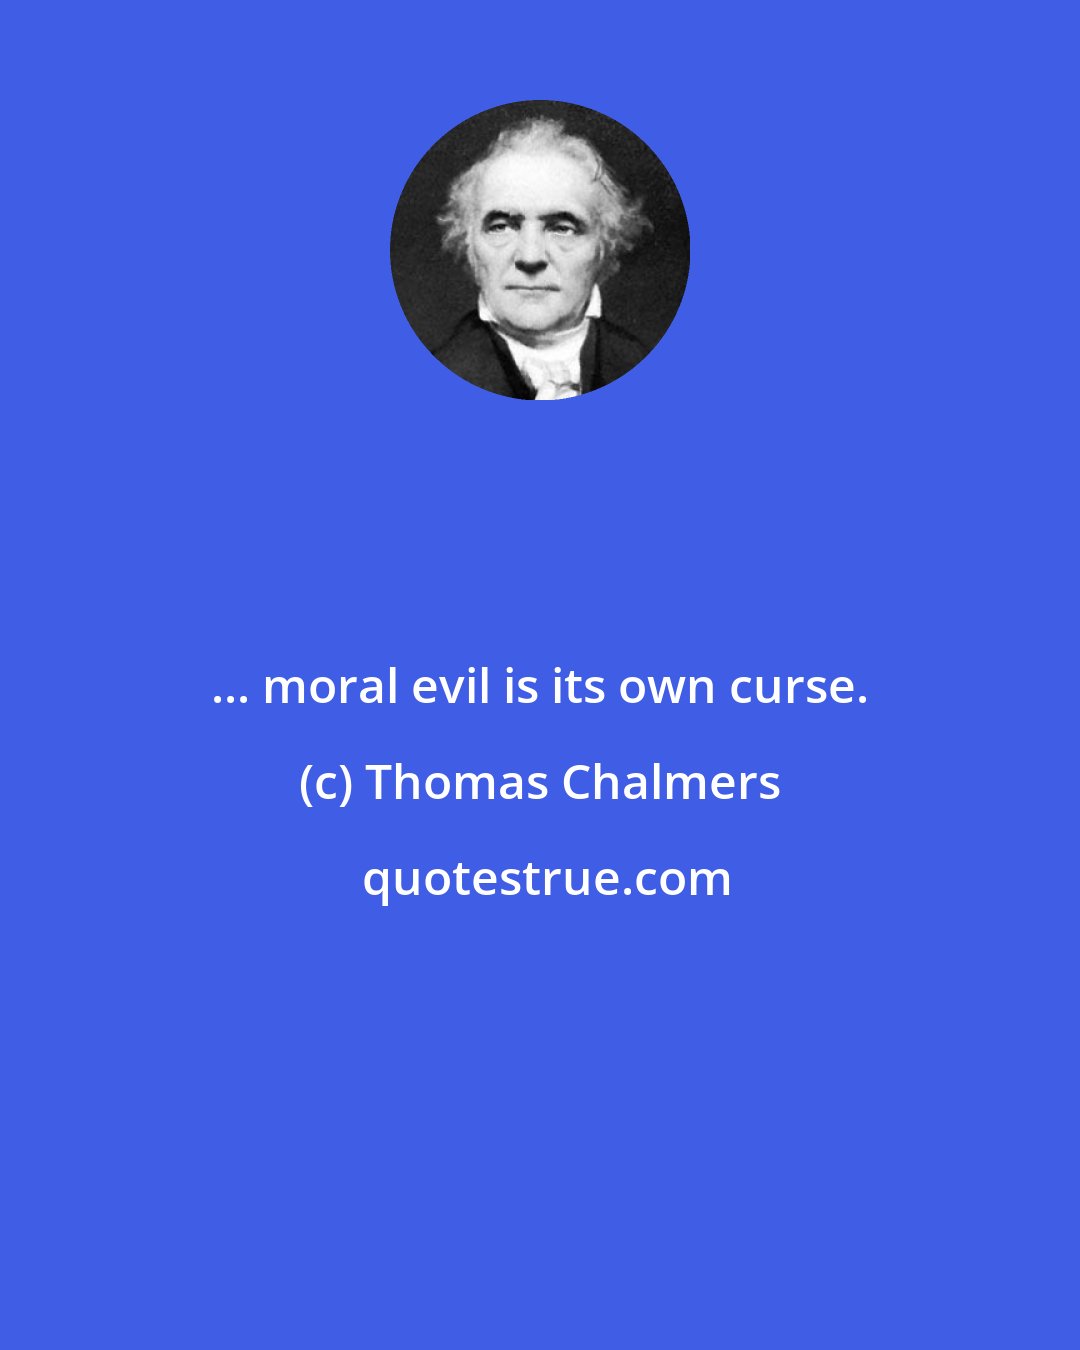 Thomas Chalmers: ... moral evil is its own curse.